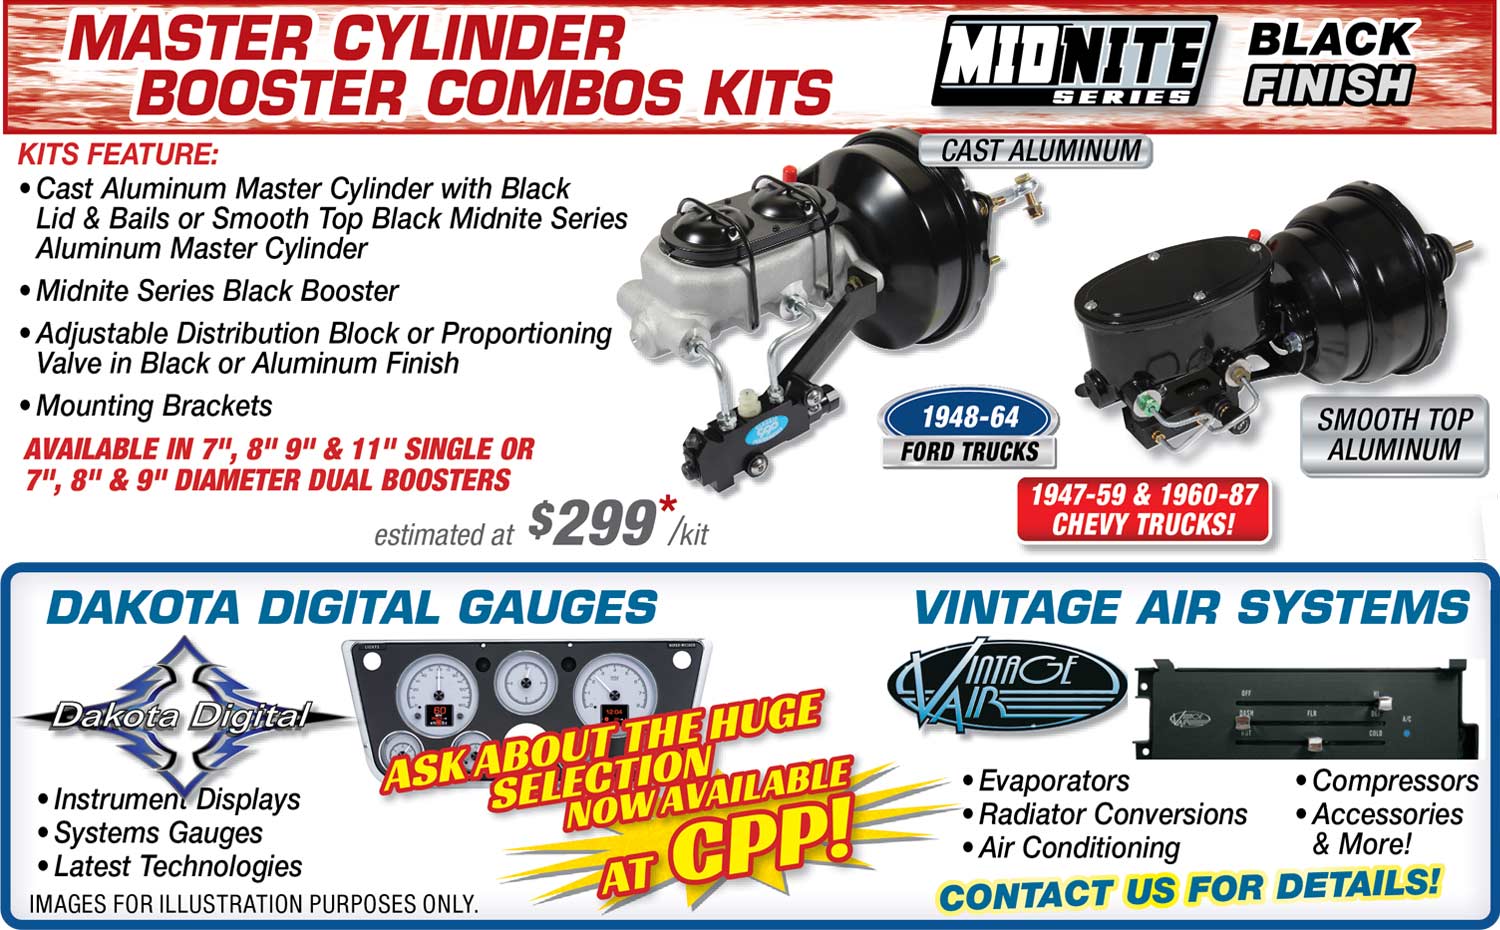 Master Cylinder Booster Combos Kits